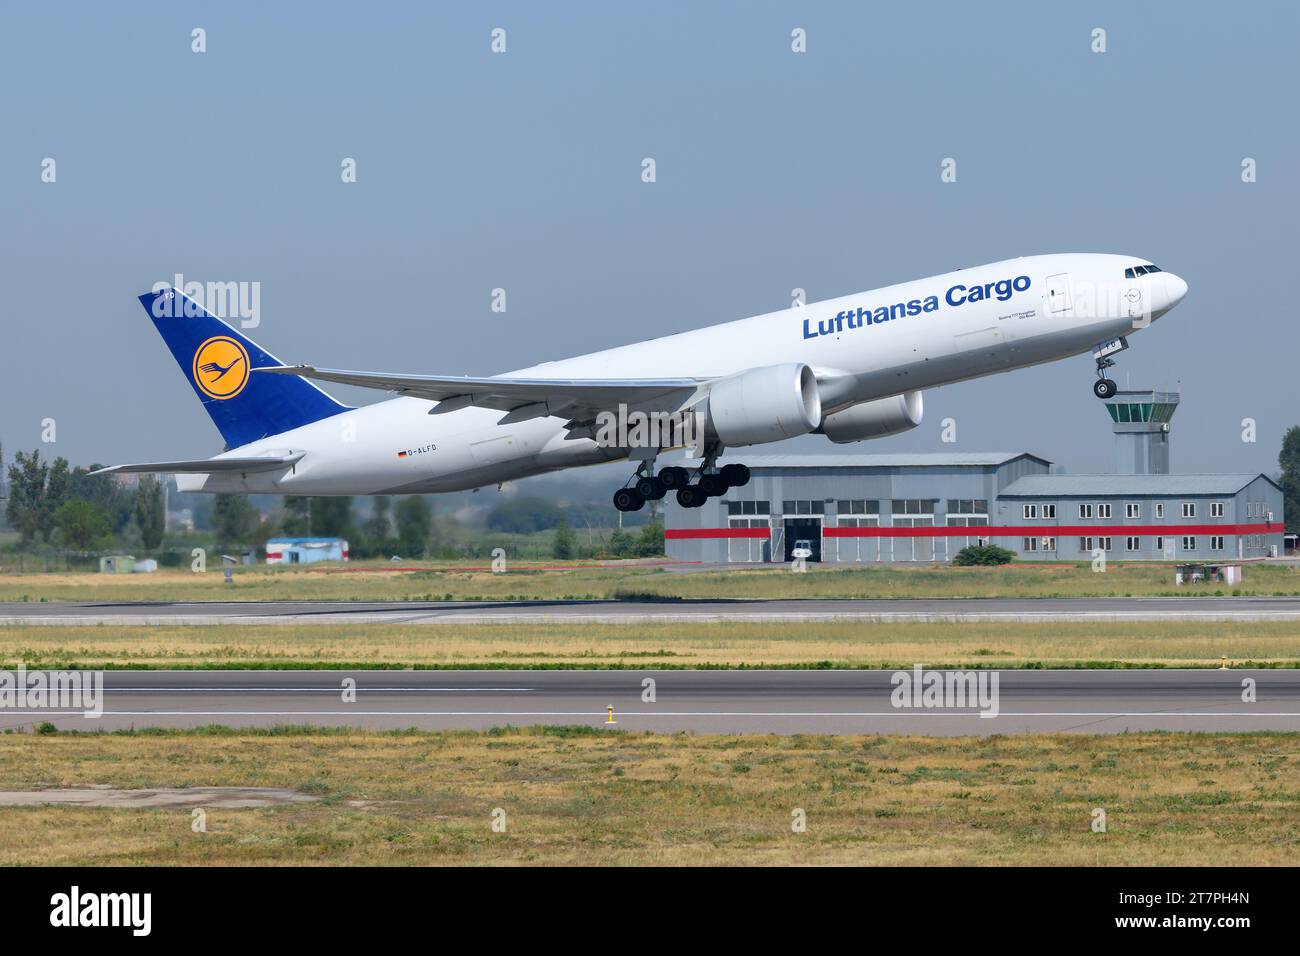 Lufthansa Cargo Boeing 777F aircraft taking off. Airplane of model 777 for freigther transport of Lufthansa Cargo. Plane of LH Cargo departing. Stock Photo